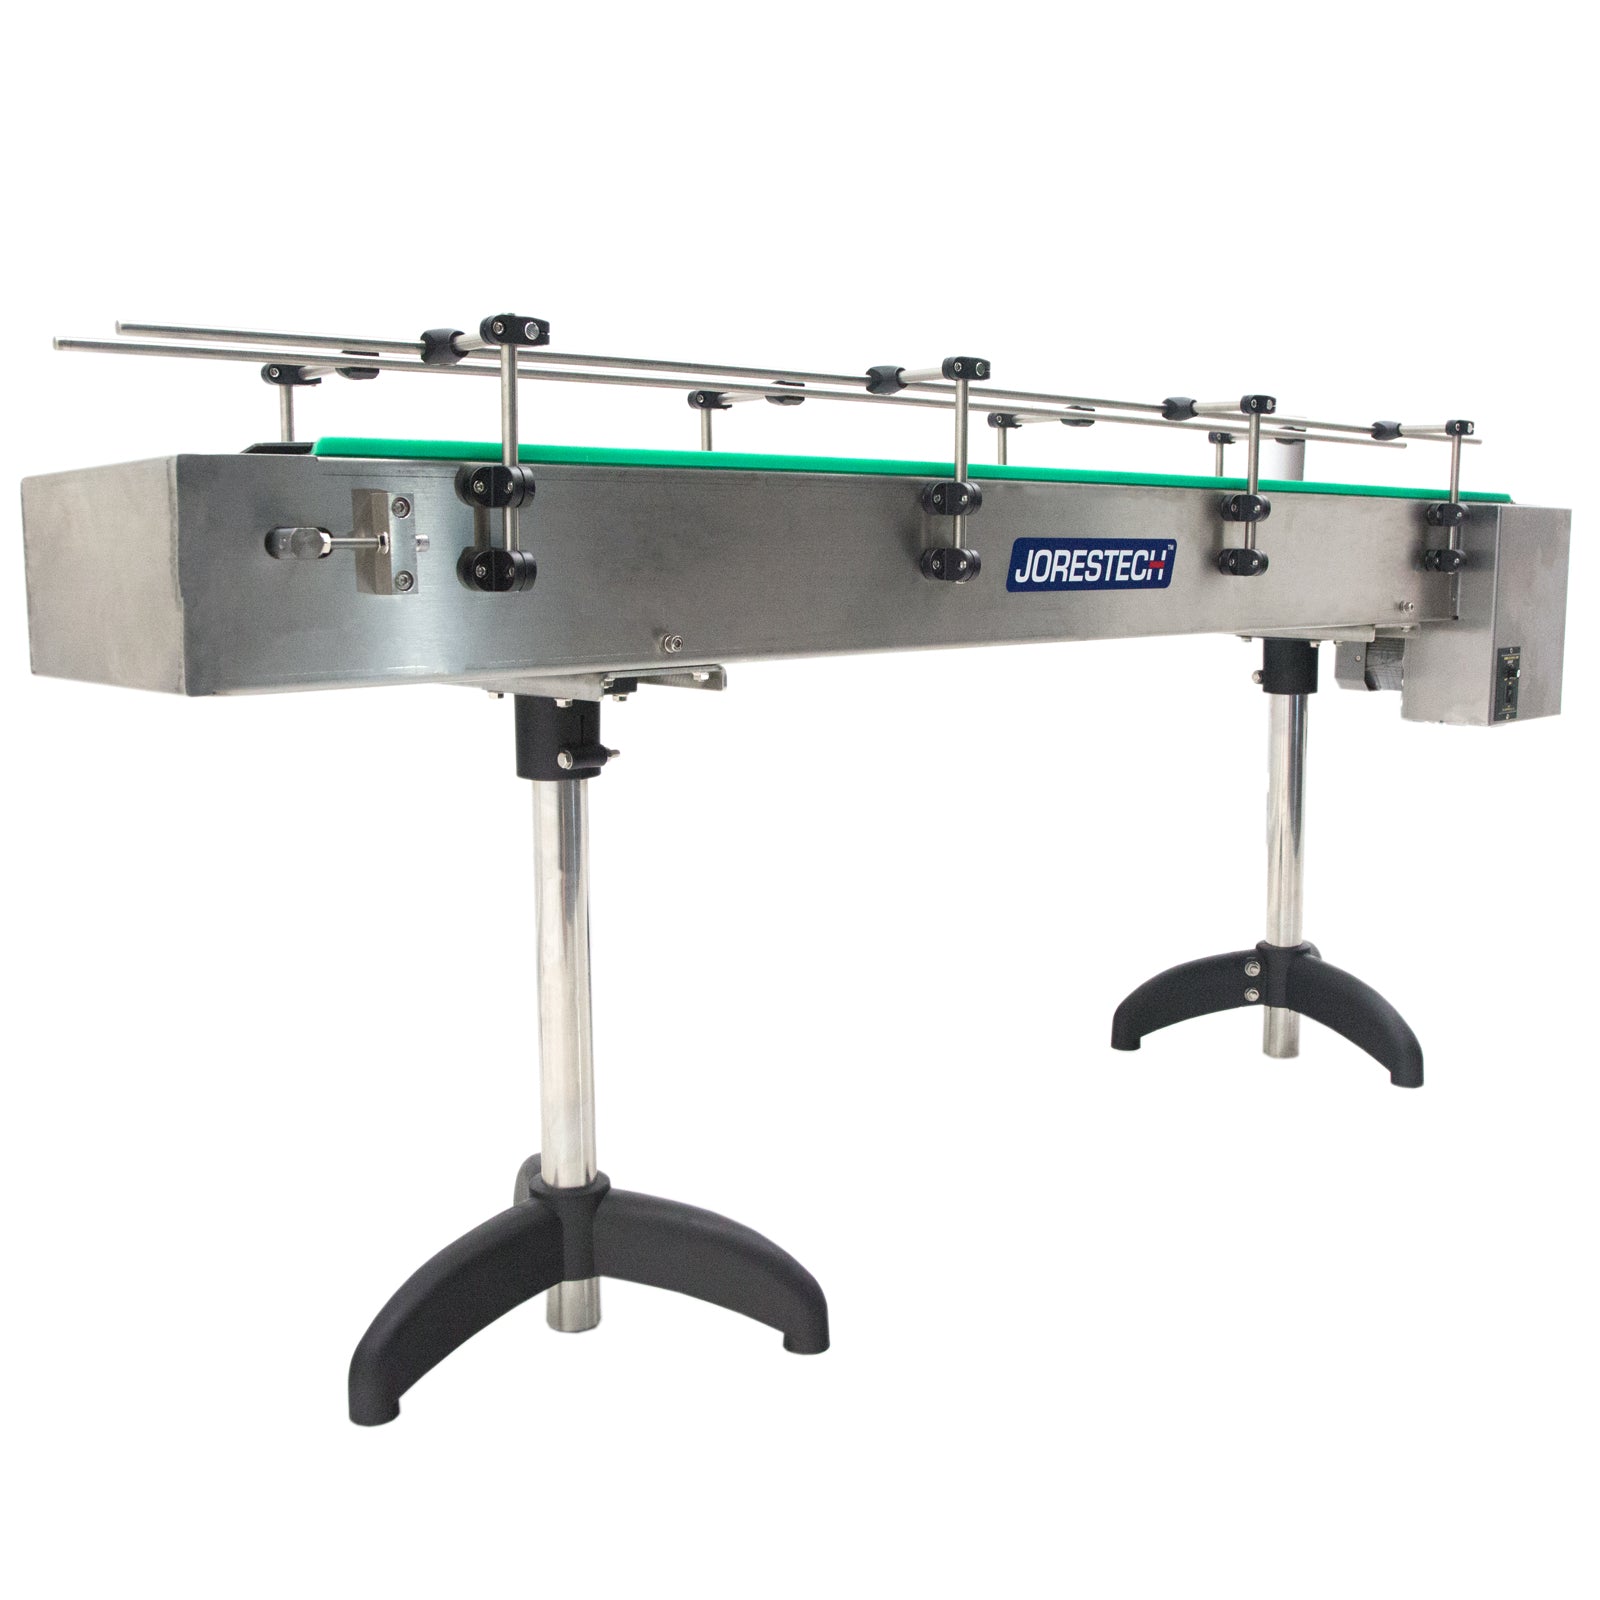 stainless steel motorized conveyor with blue Jorestech logo in the center